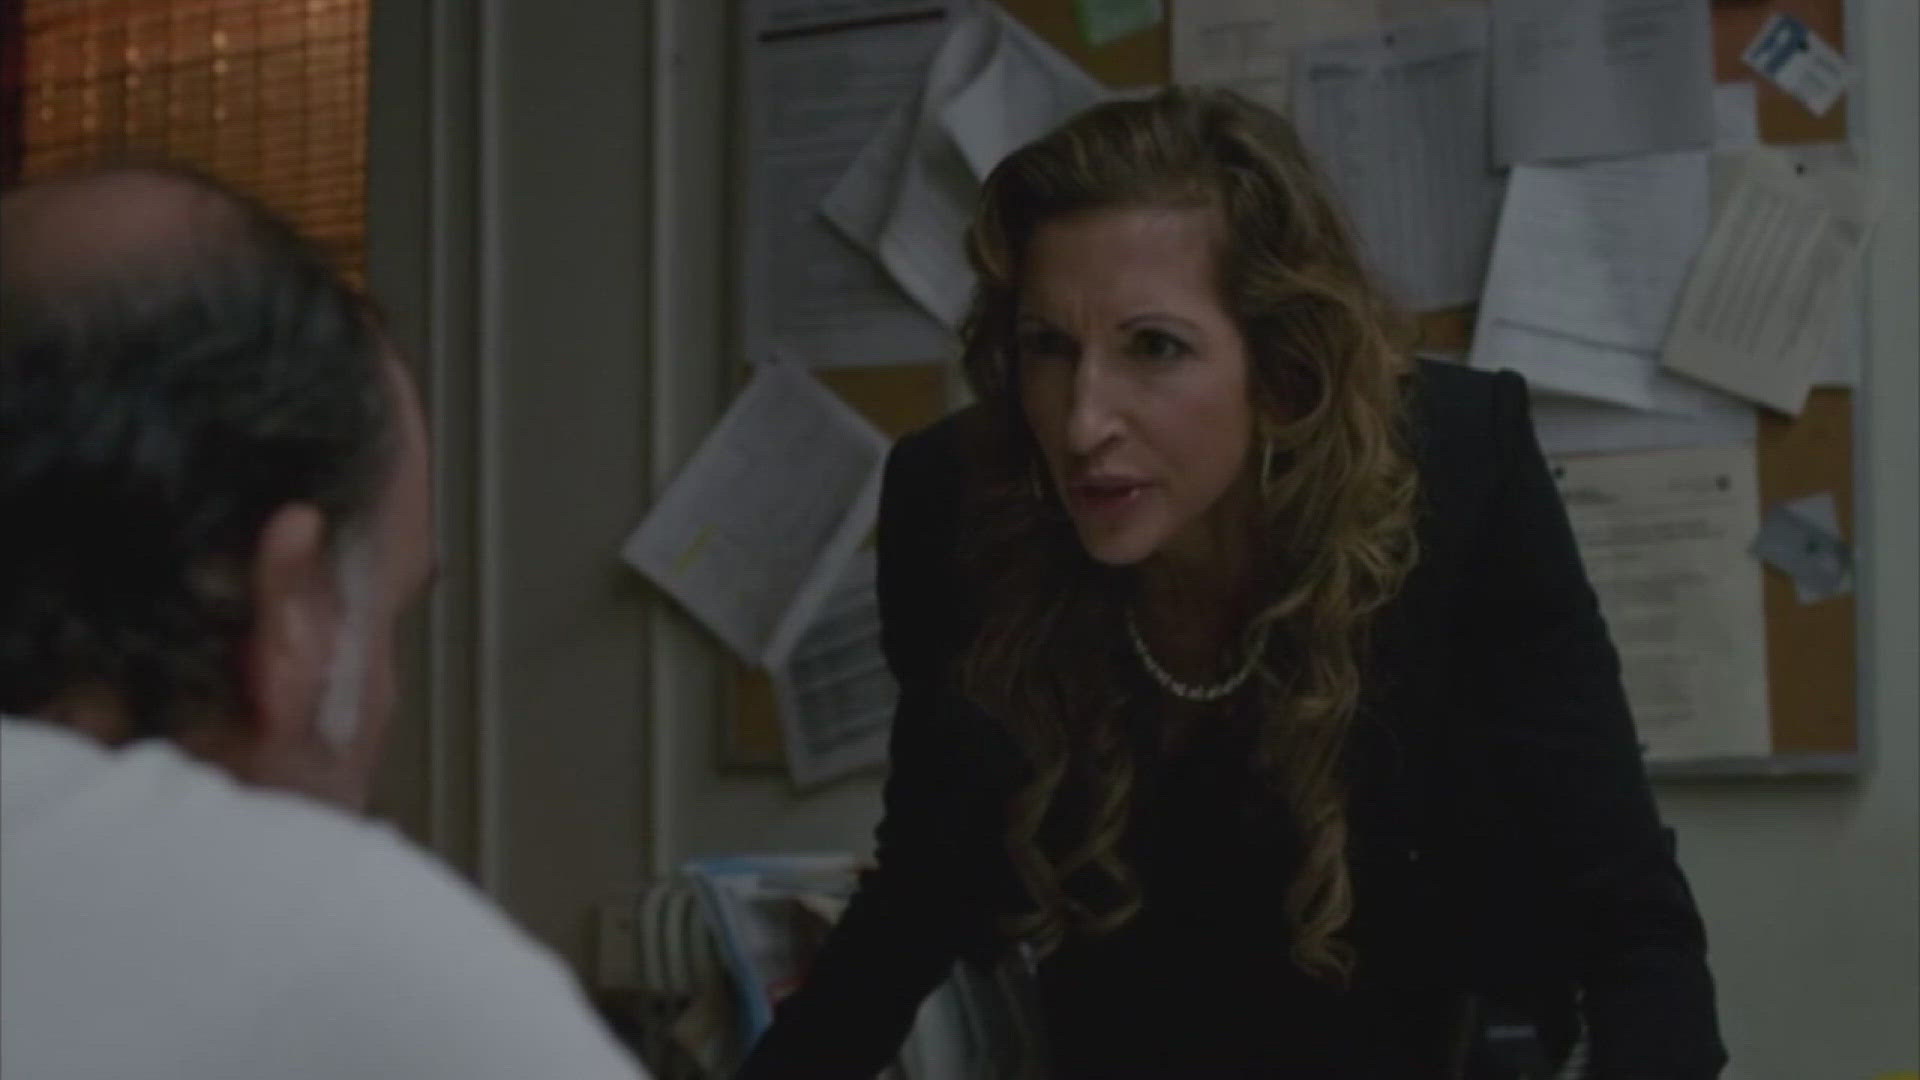 Actor Alysia Reiner is on the advisory board for SeriesFest in Denver, which runs through May 5.